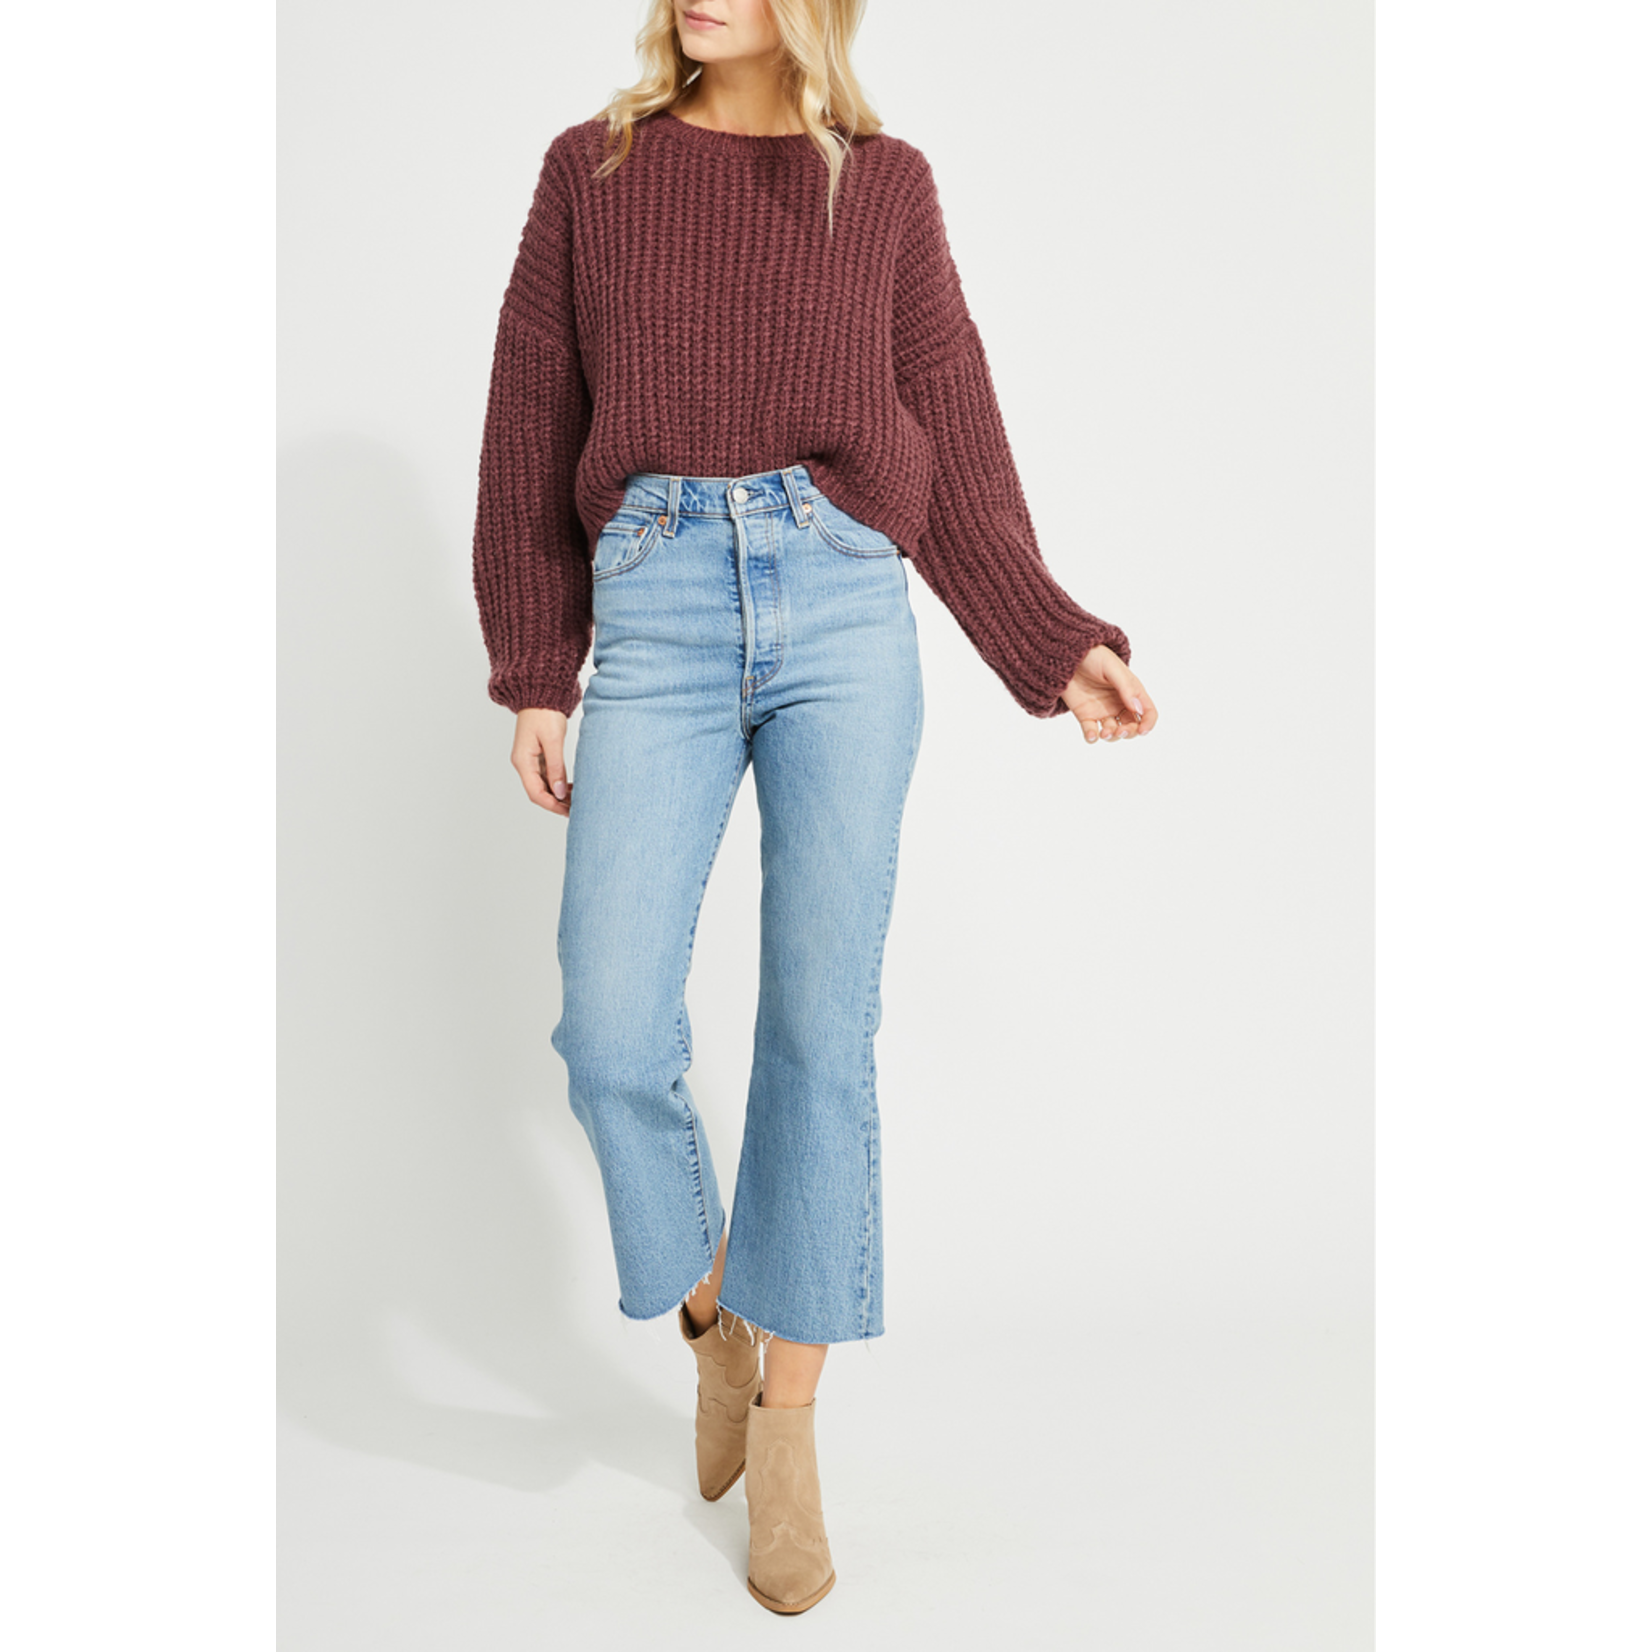 Gentle Fawn Soft cropped sweater